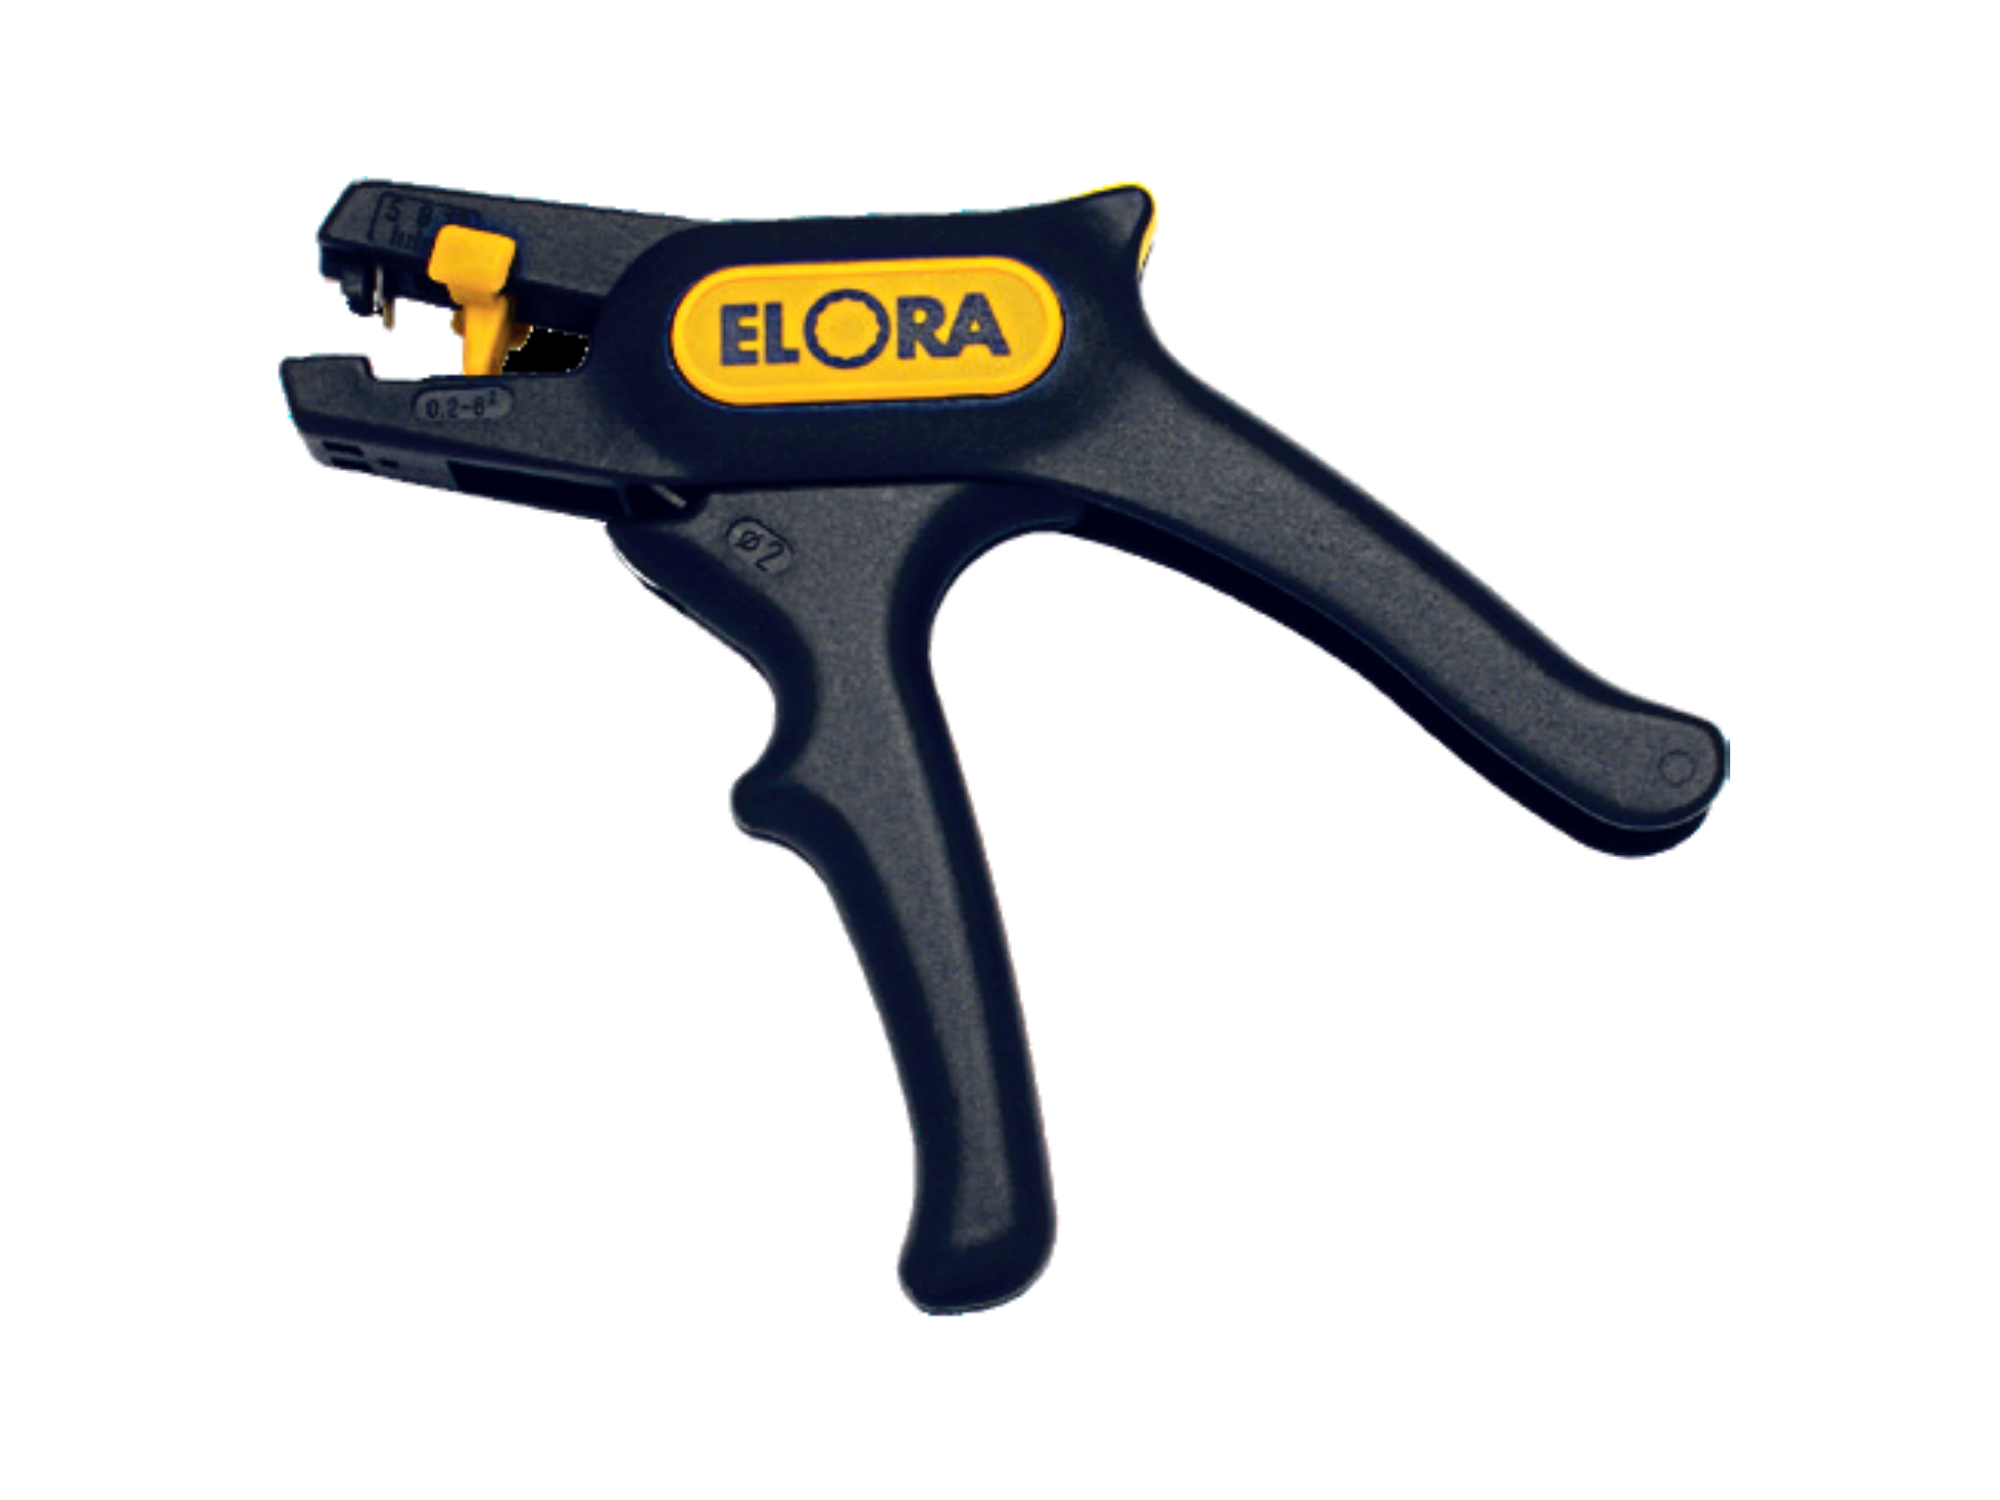 ELORA 1094 Automatic Wire Stripper (ELORA Tools) - Premium Wire Stripper from ELORA - Shop now at Yew Aik.